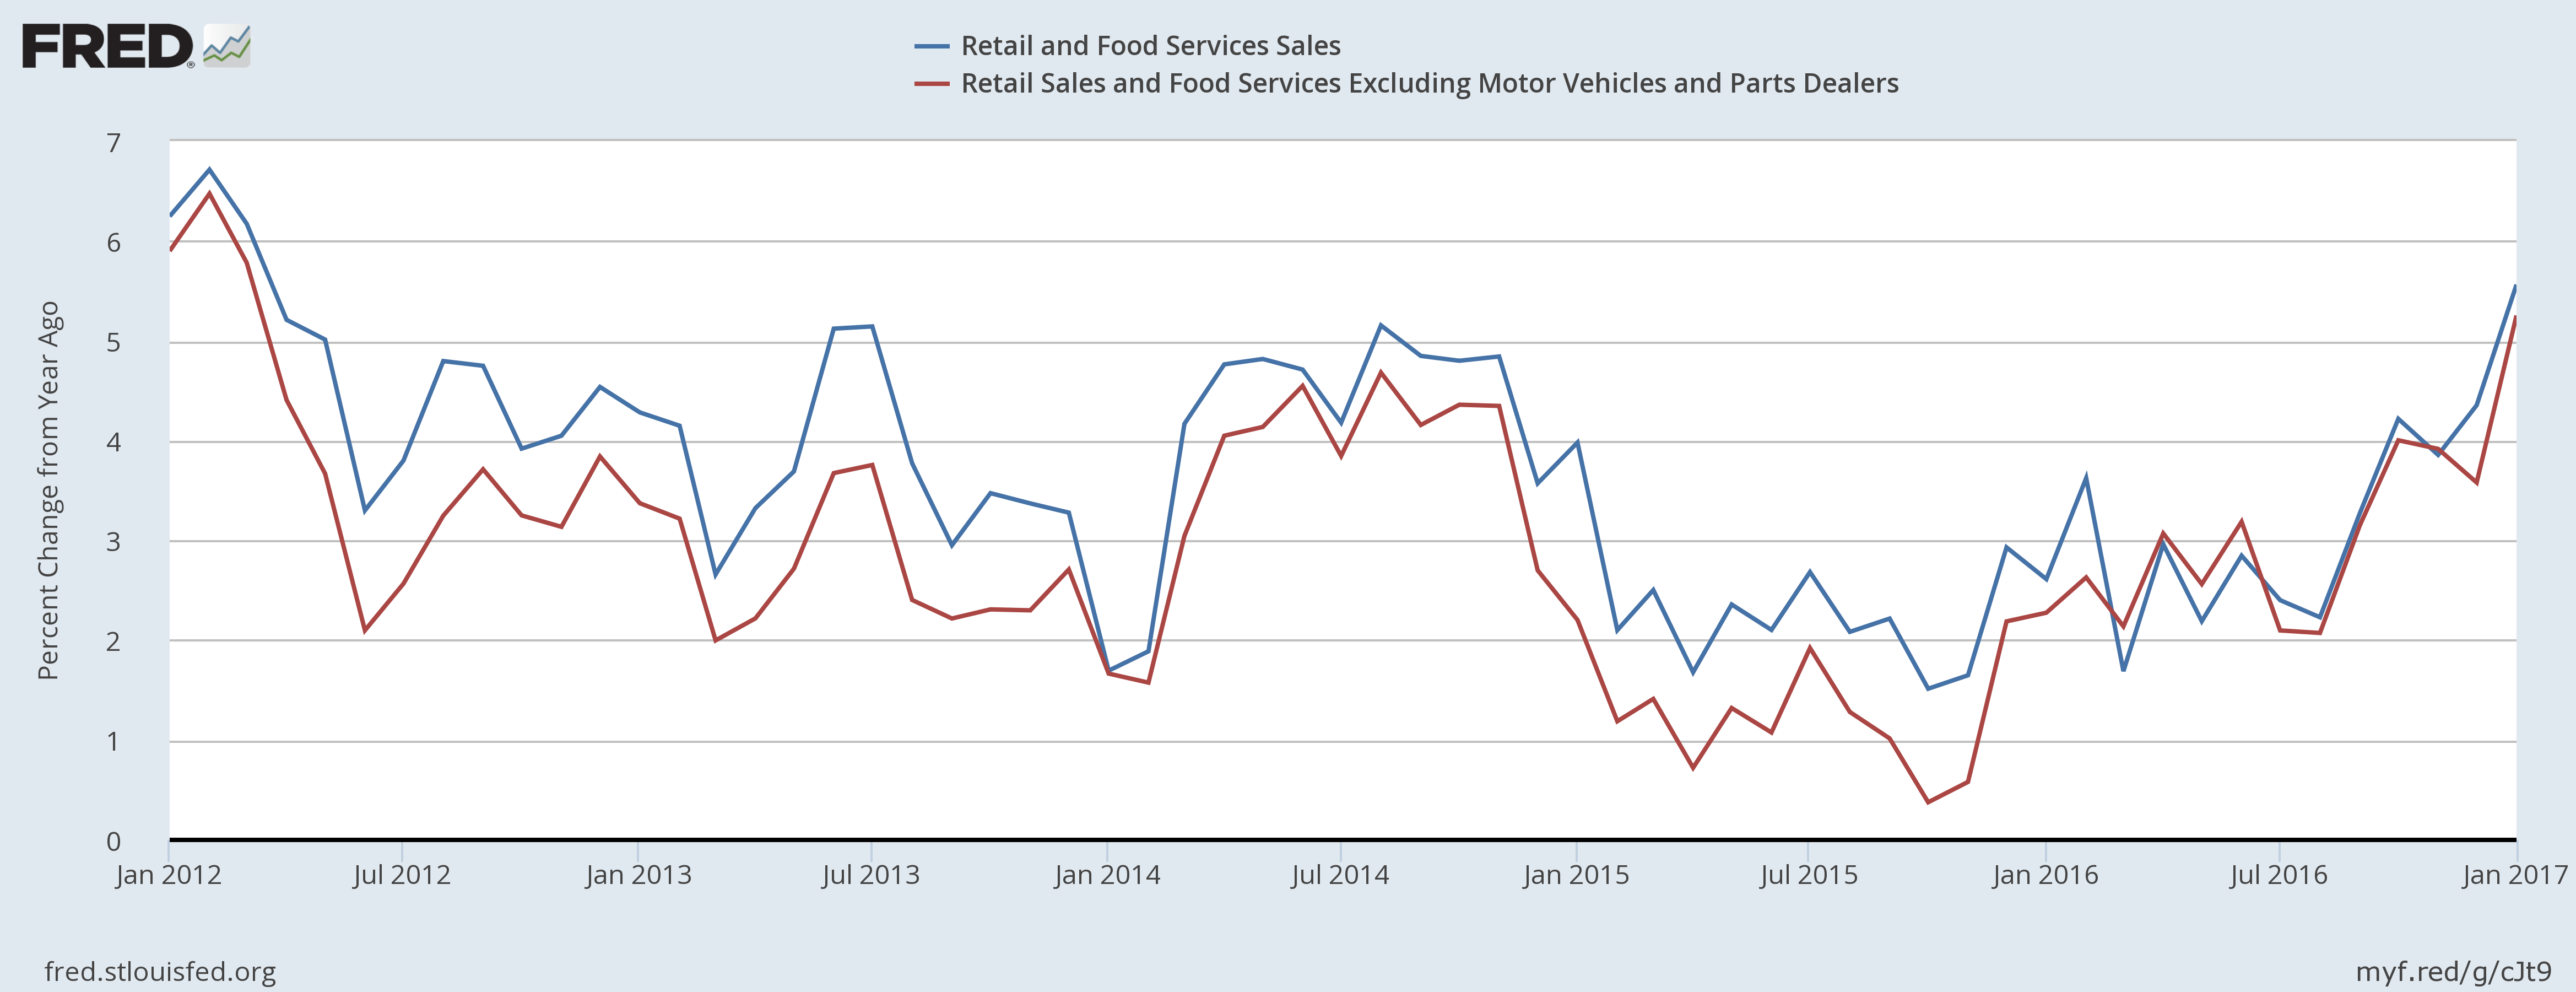 Retail sales, a coincident indicator, rose ,4% M/M and 5.6% Y/Y: